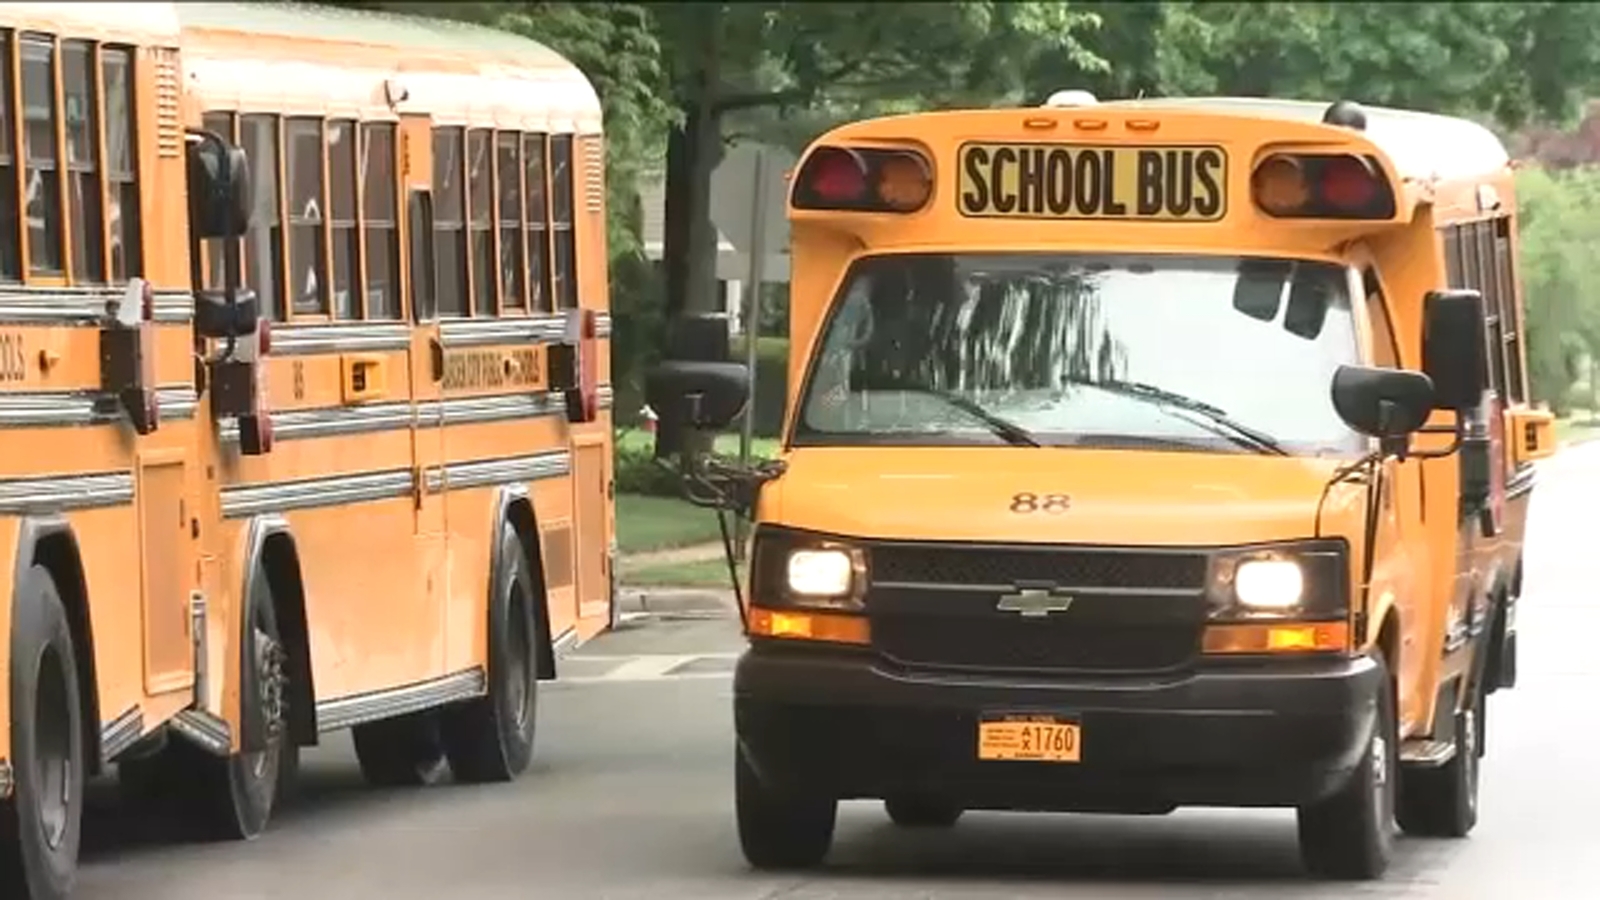 Hempstead Bus Cameras: Town says camera program paying huge dividends for communities, keeping kids safe in Nassau County [Video]